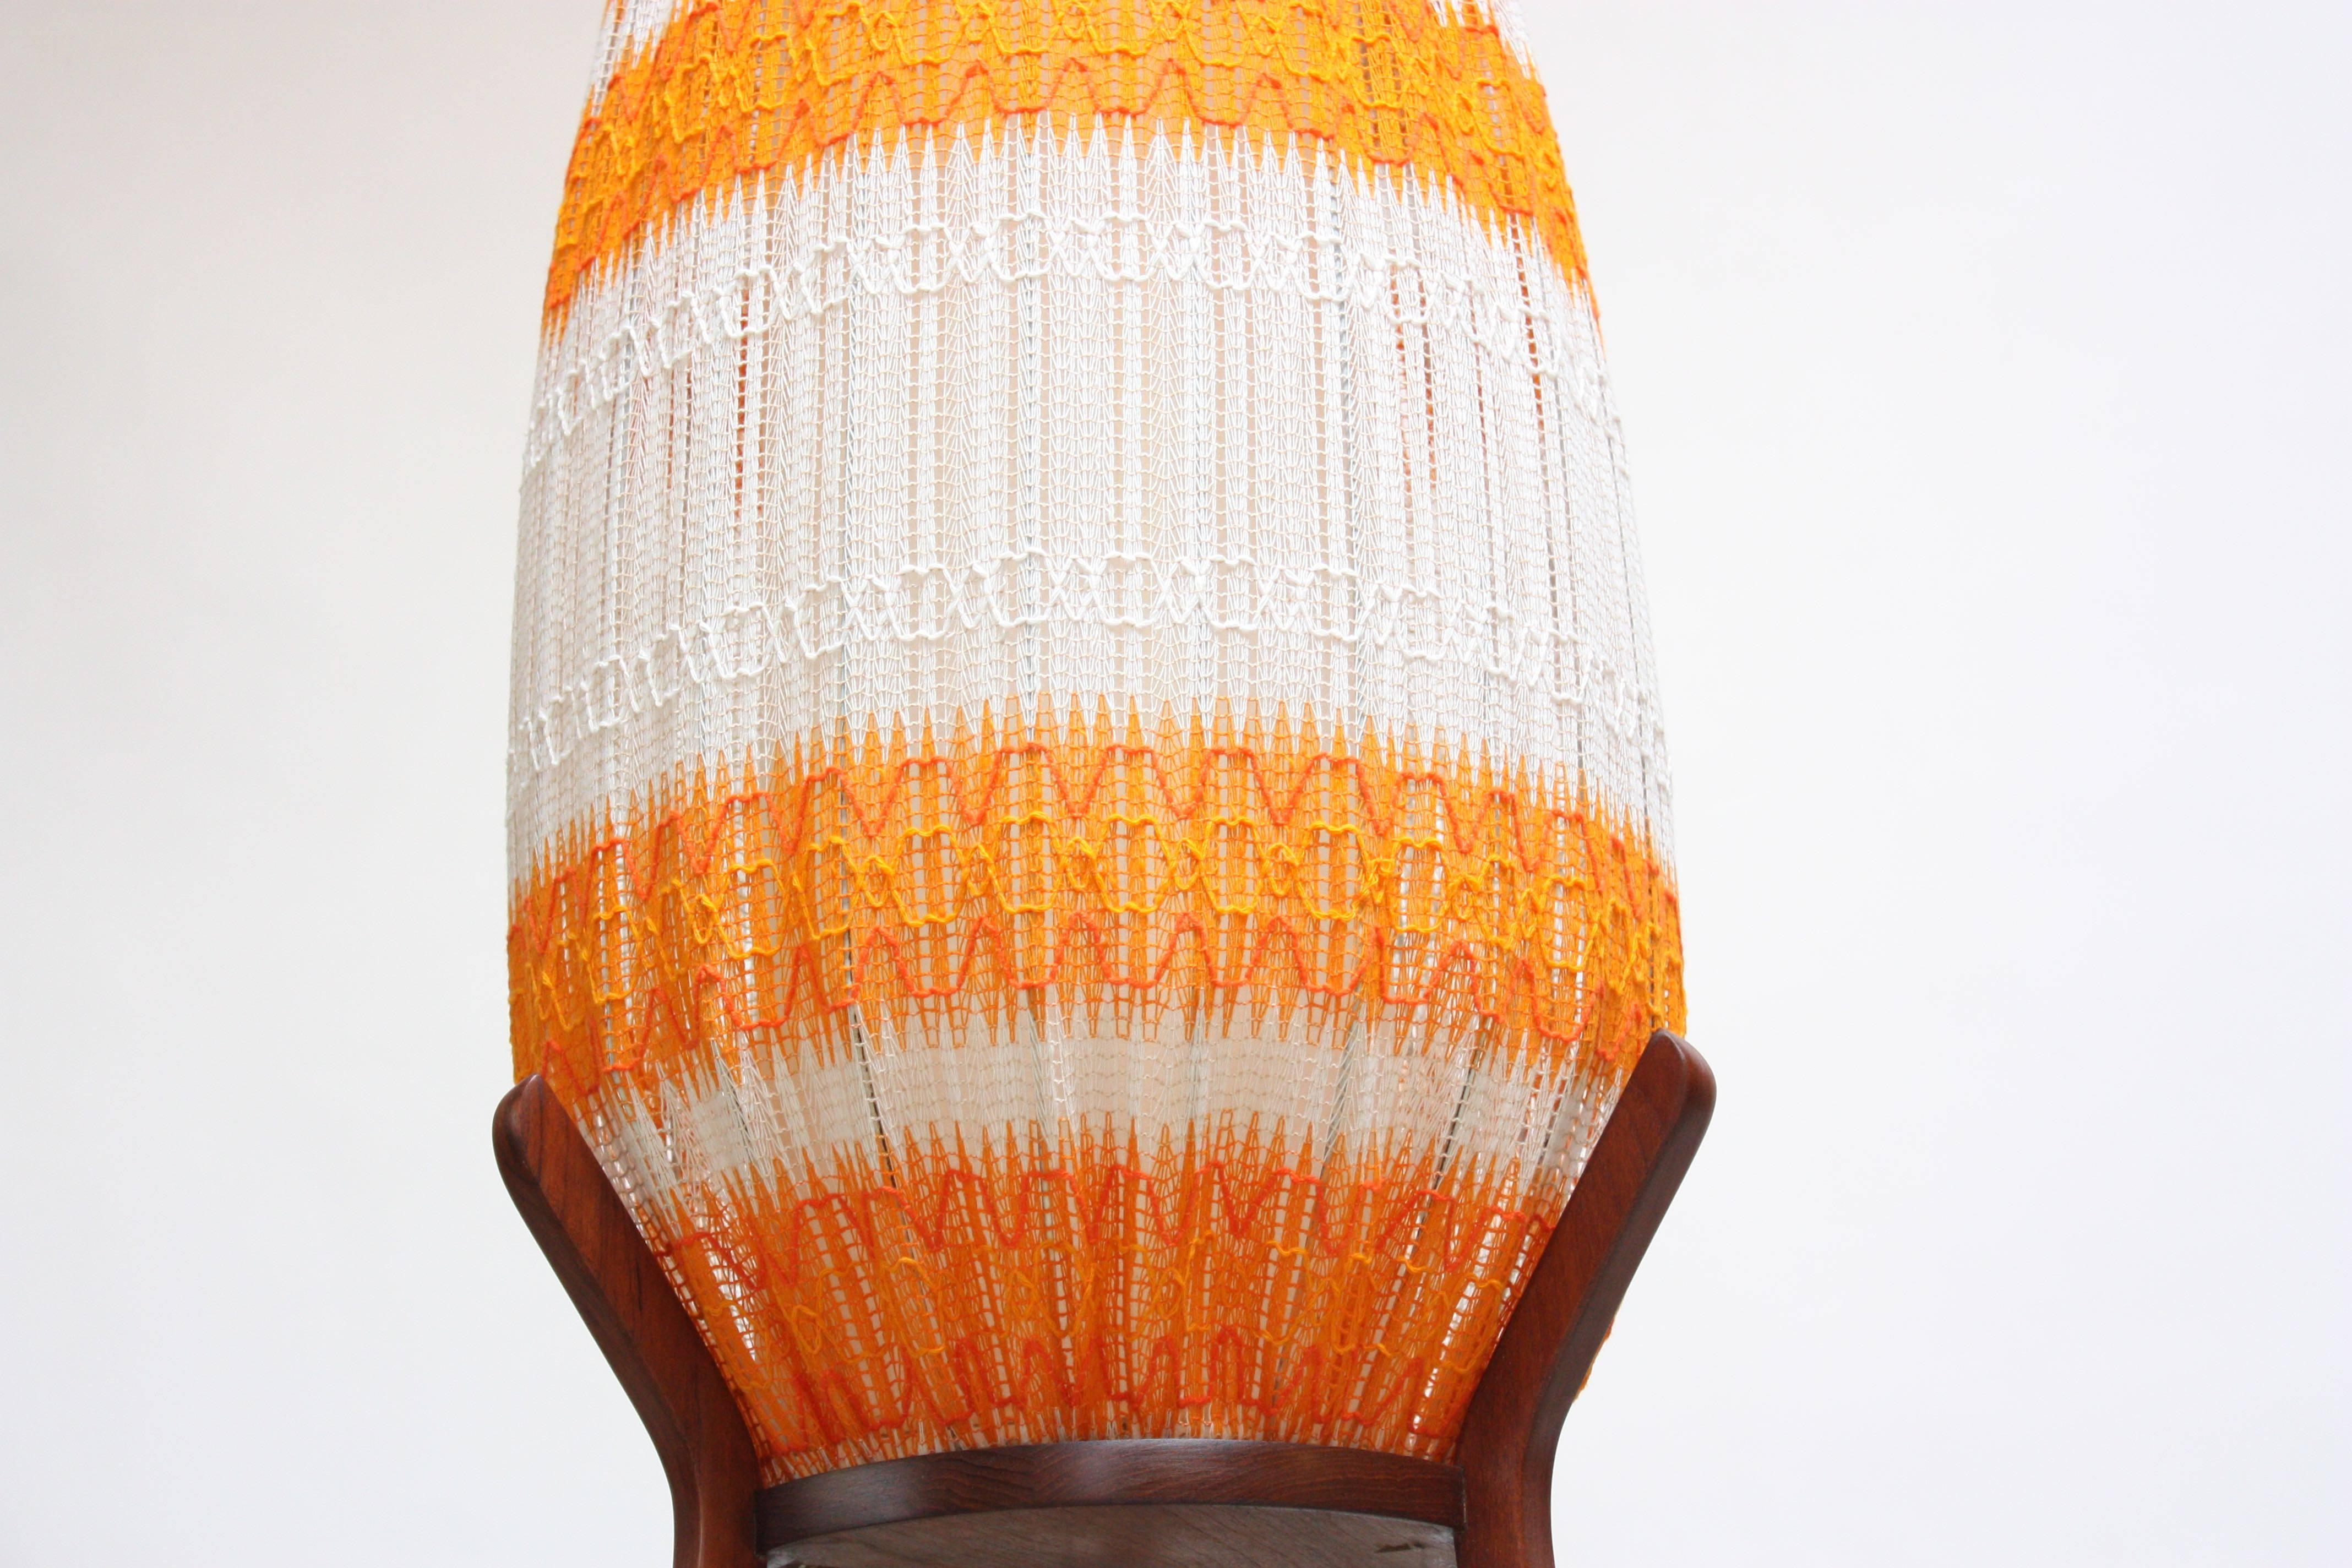 This 1960s Danish floor lamp is composed of an exterior orange and white linen shade with a crocheted pattern. (There is a parchment inner shade that is connected to the steel form body that the linen shade conceals.) The tripod base is teak, and